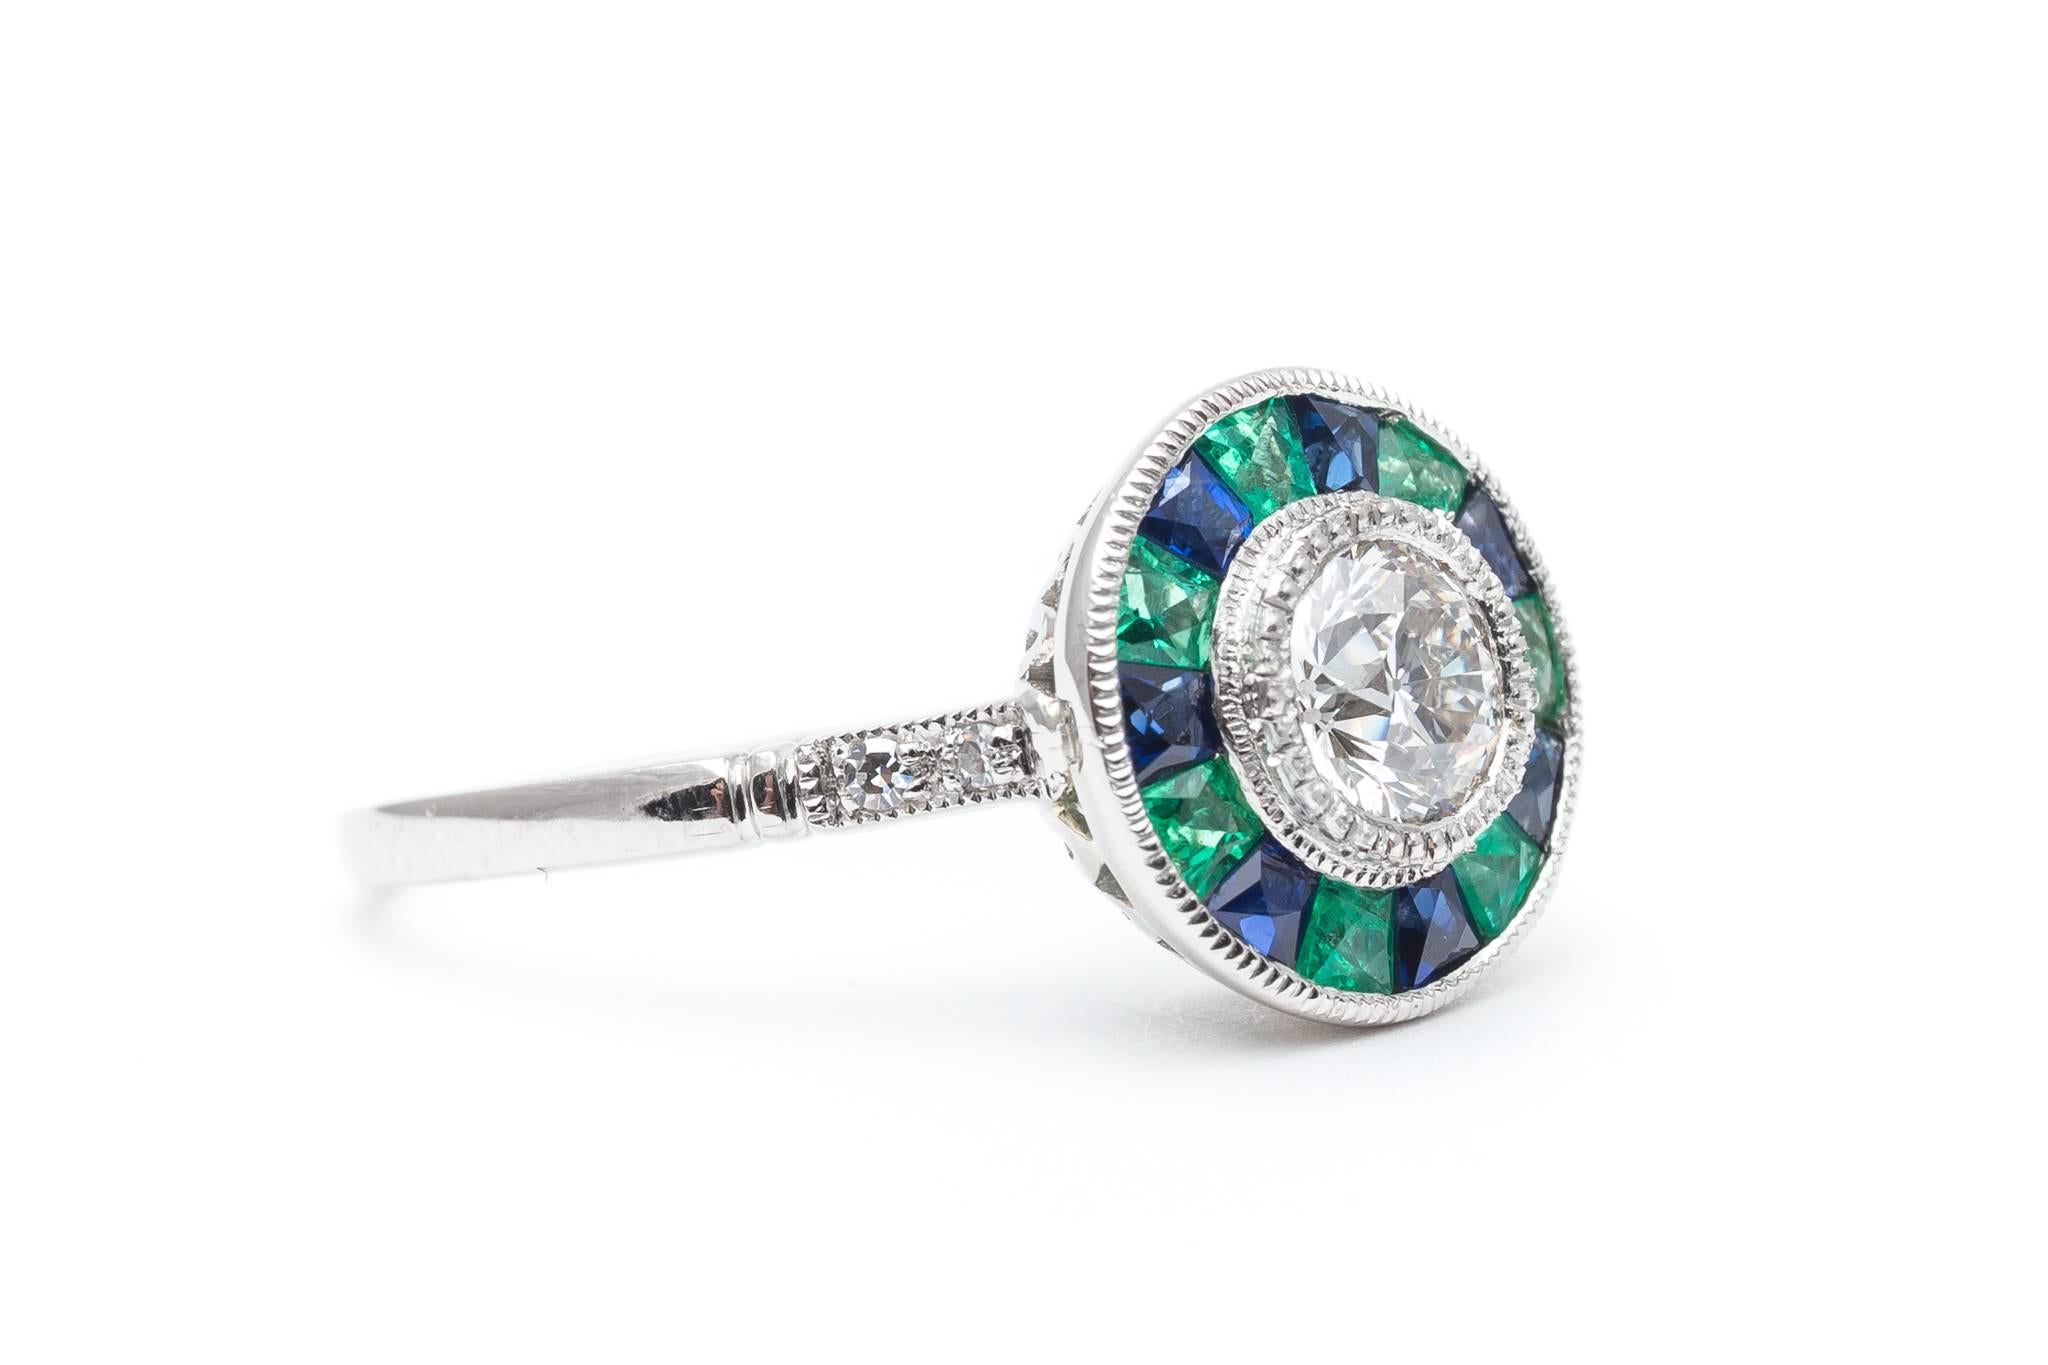 A truly special diamond, sapphire, and emerald target ring. Centered by a single bezel set antique European cut diamond weighing 0.52 carats this ring features alternating sapphires and emerald surrounding the center diamond for a truly unique look.